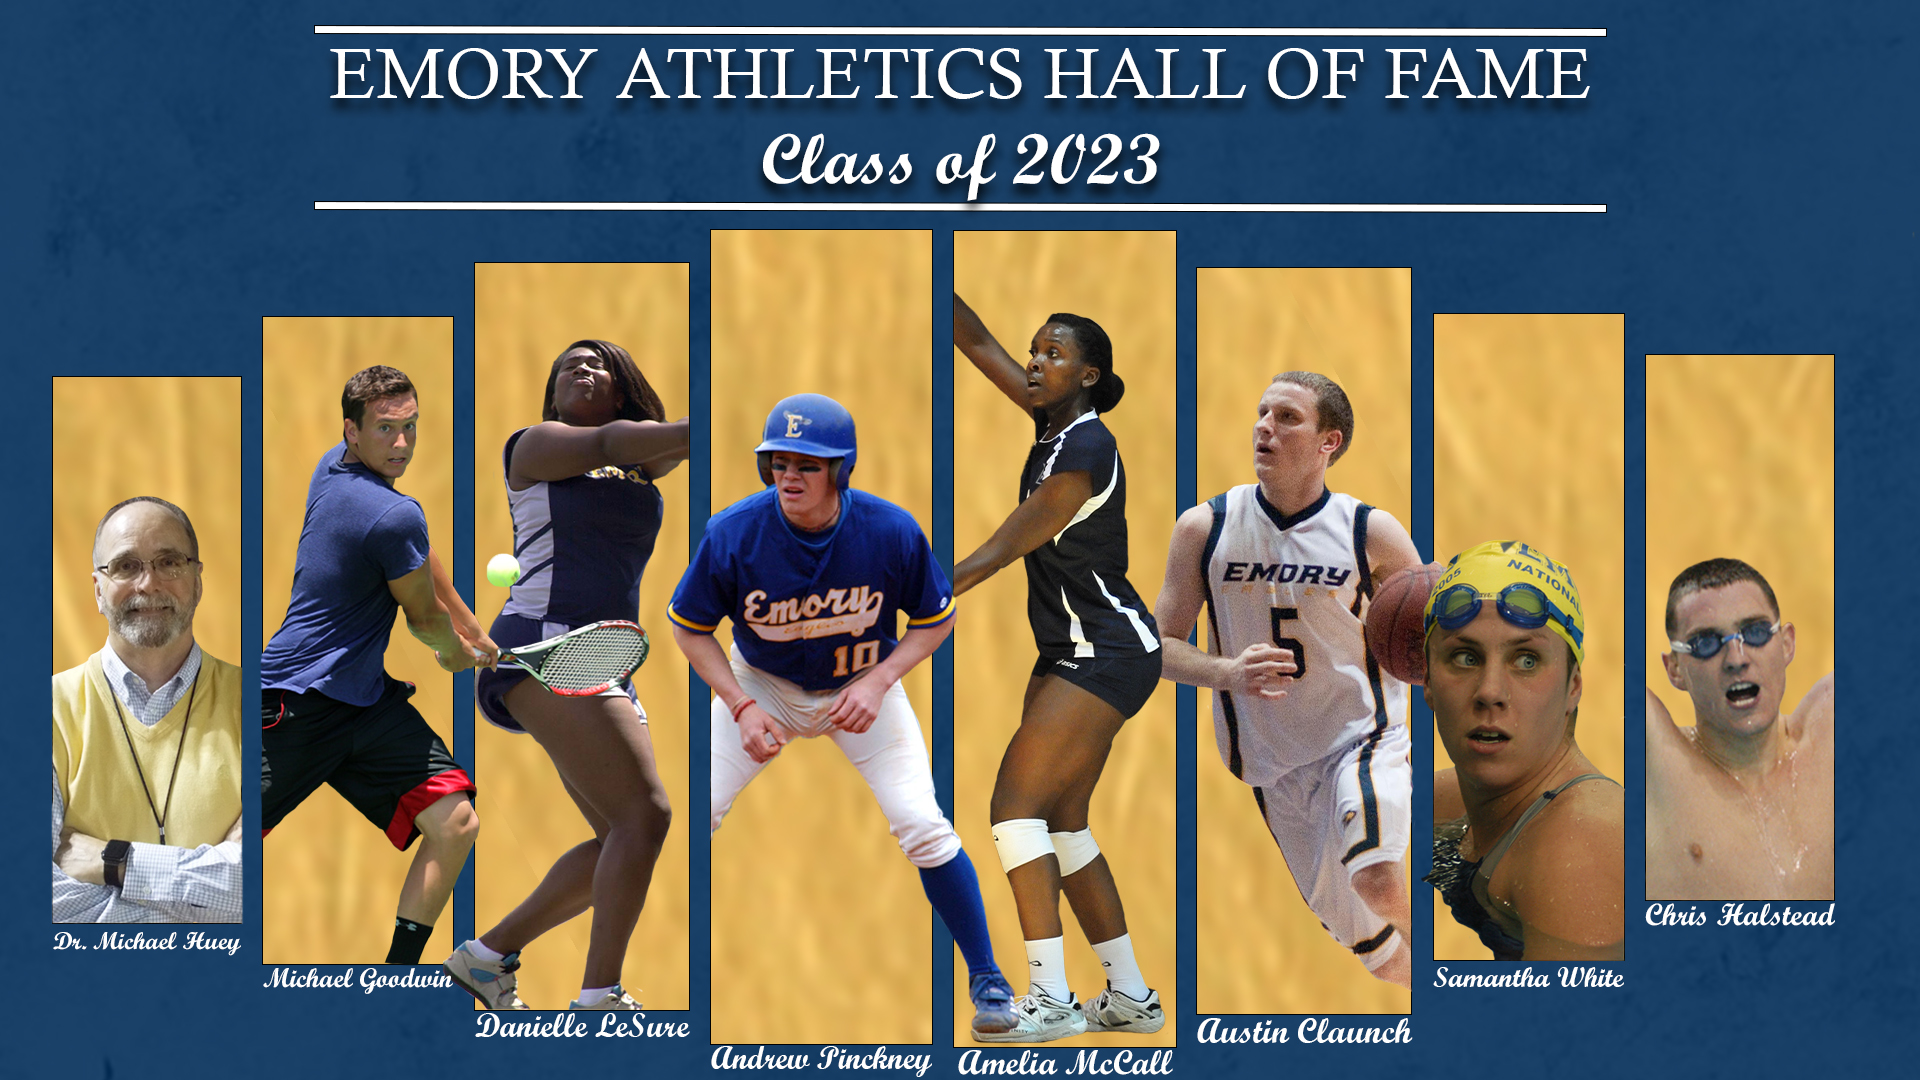 Emory Athletics Hall of Fame Ceremony Set for October 21